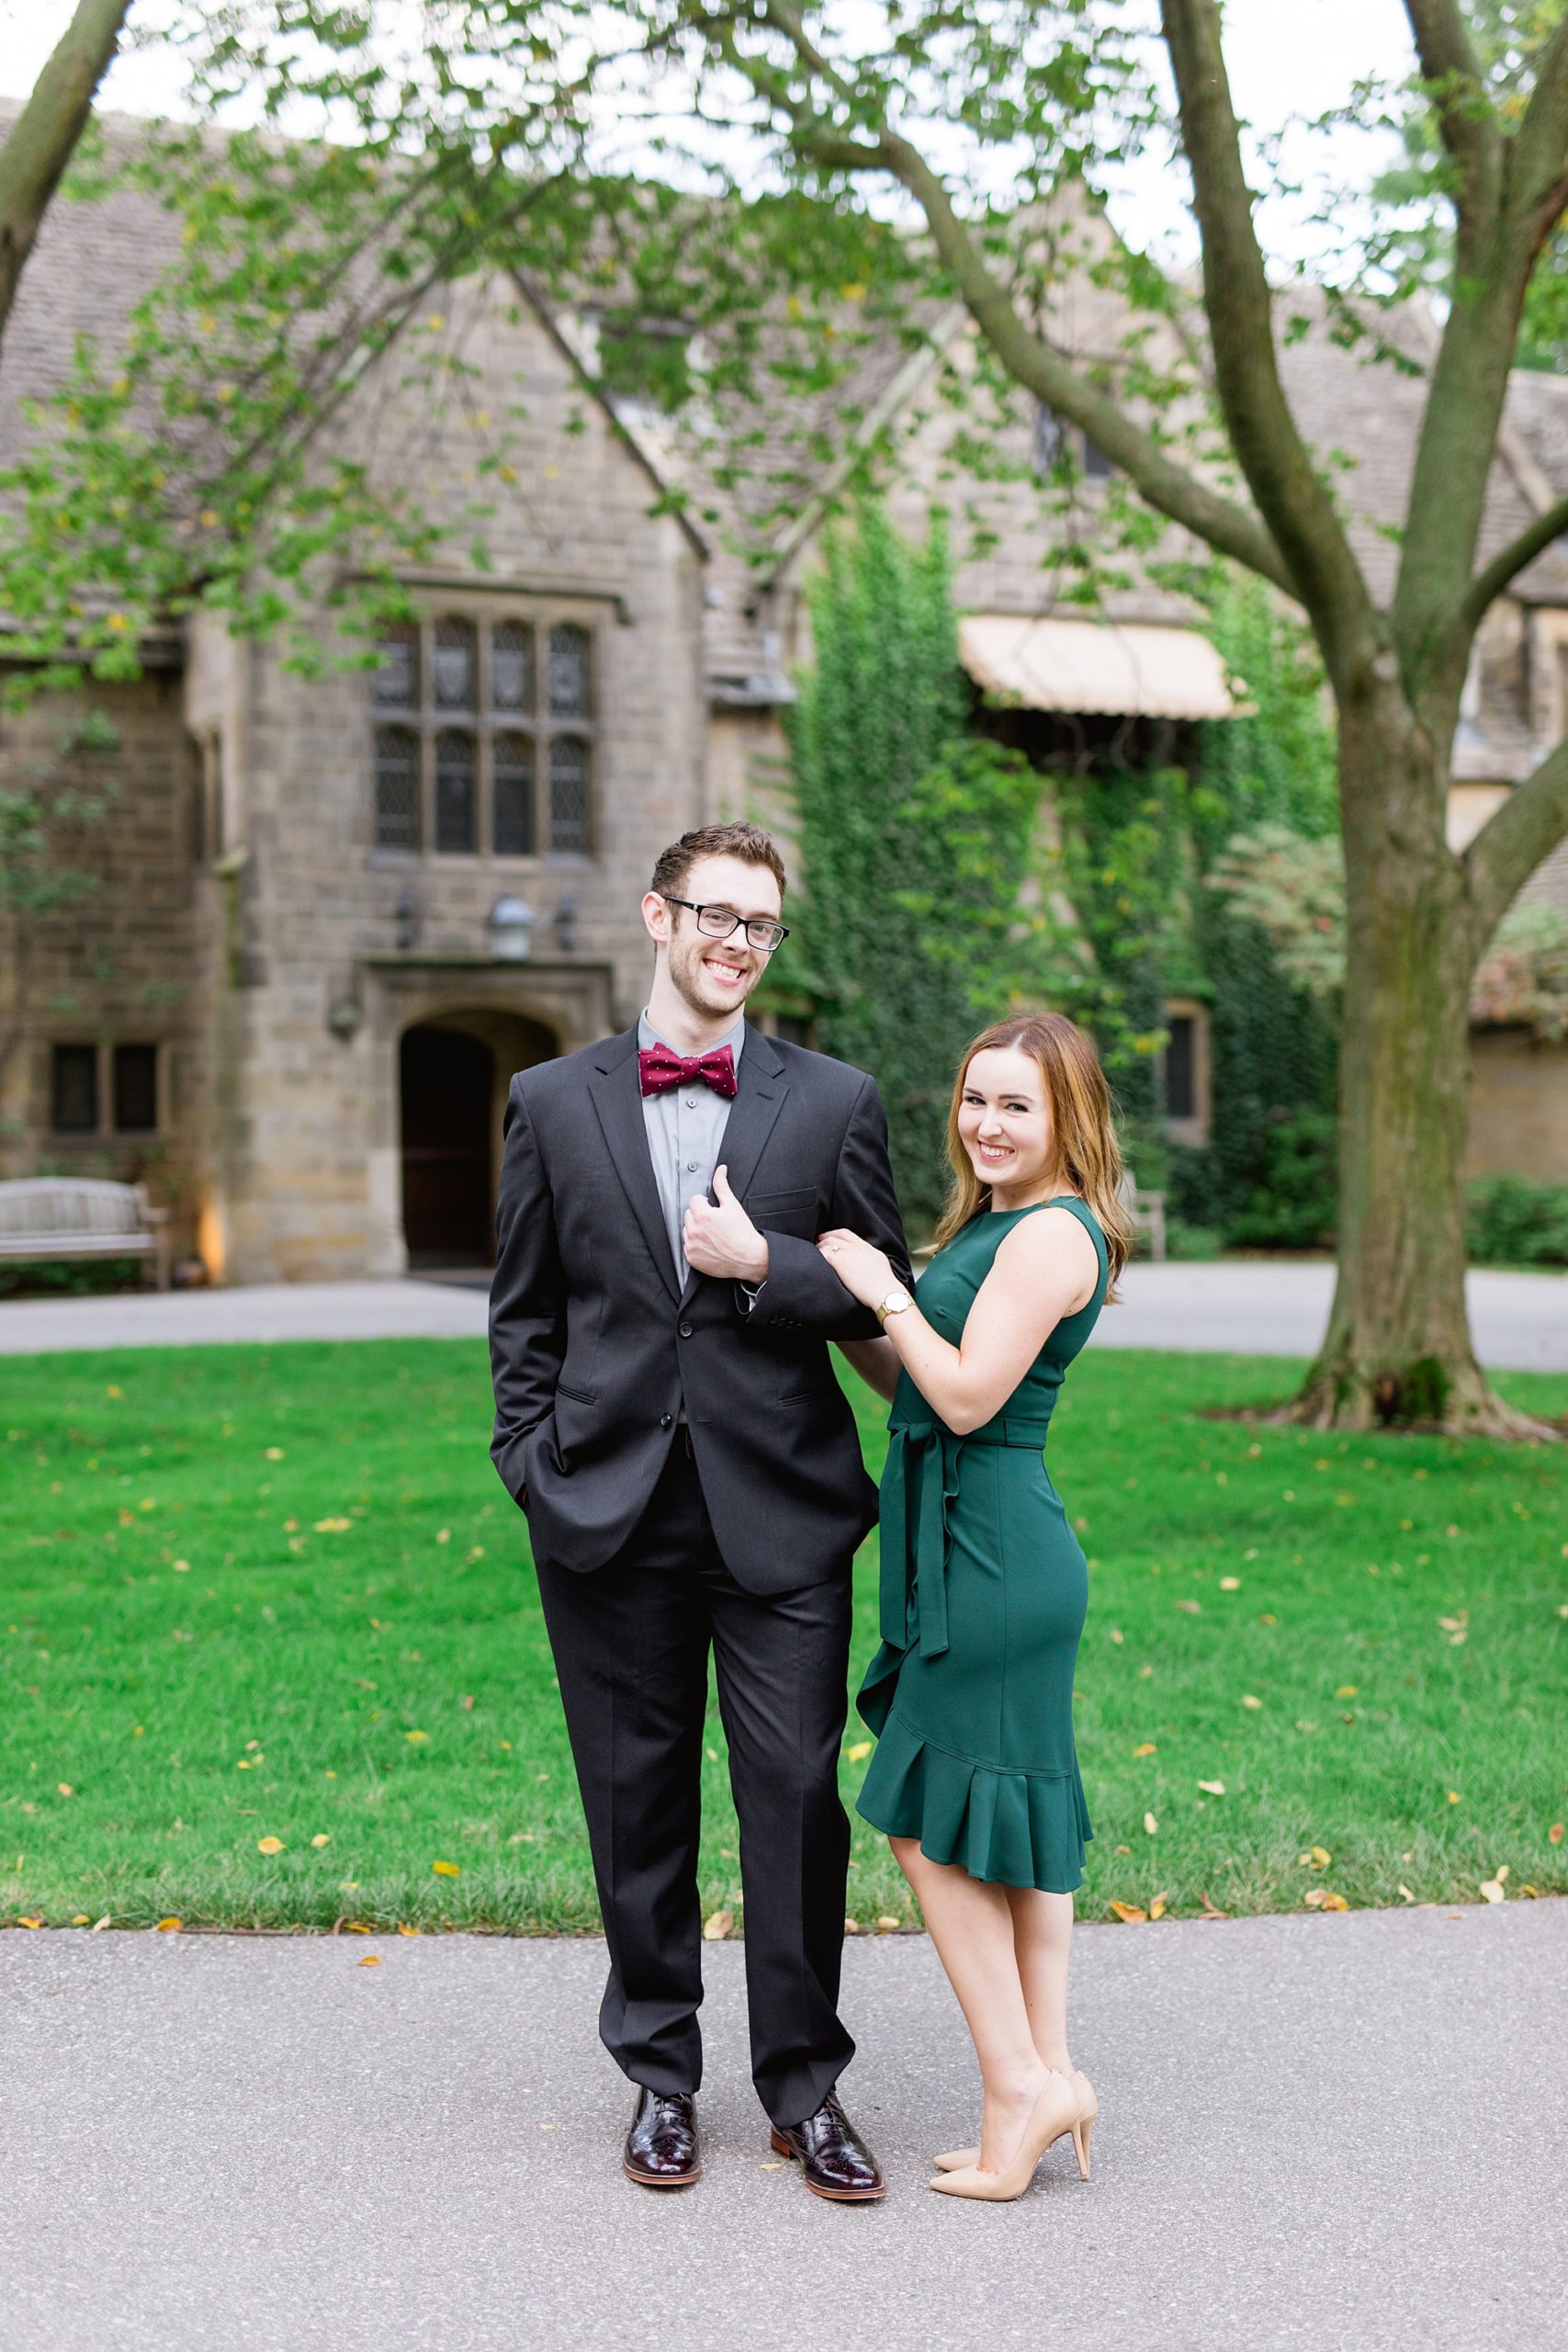 Fall Classy Engagement Shoot in Grosse Pointe, Michigan by Brianne Rochelle Photography